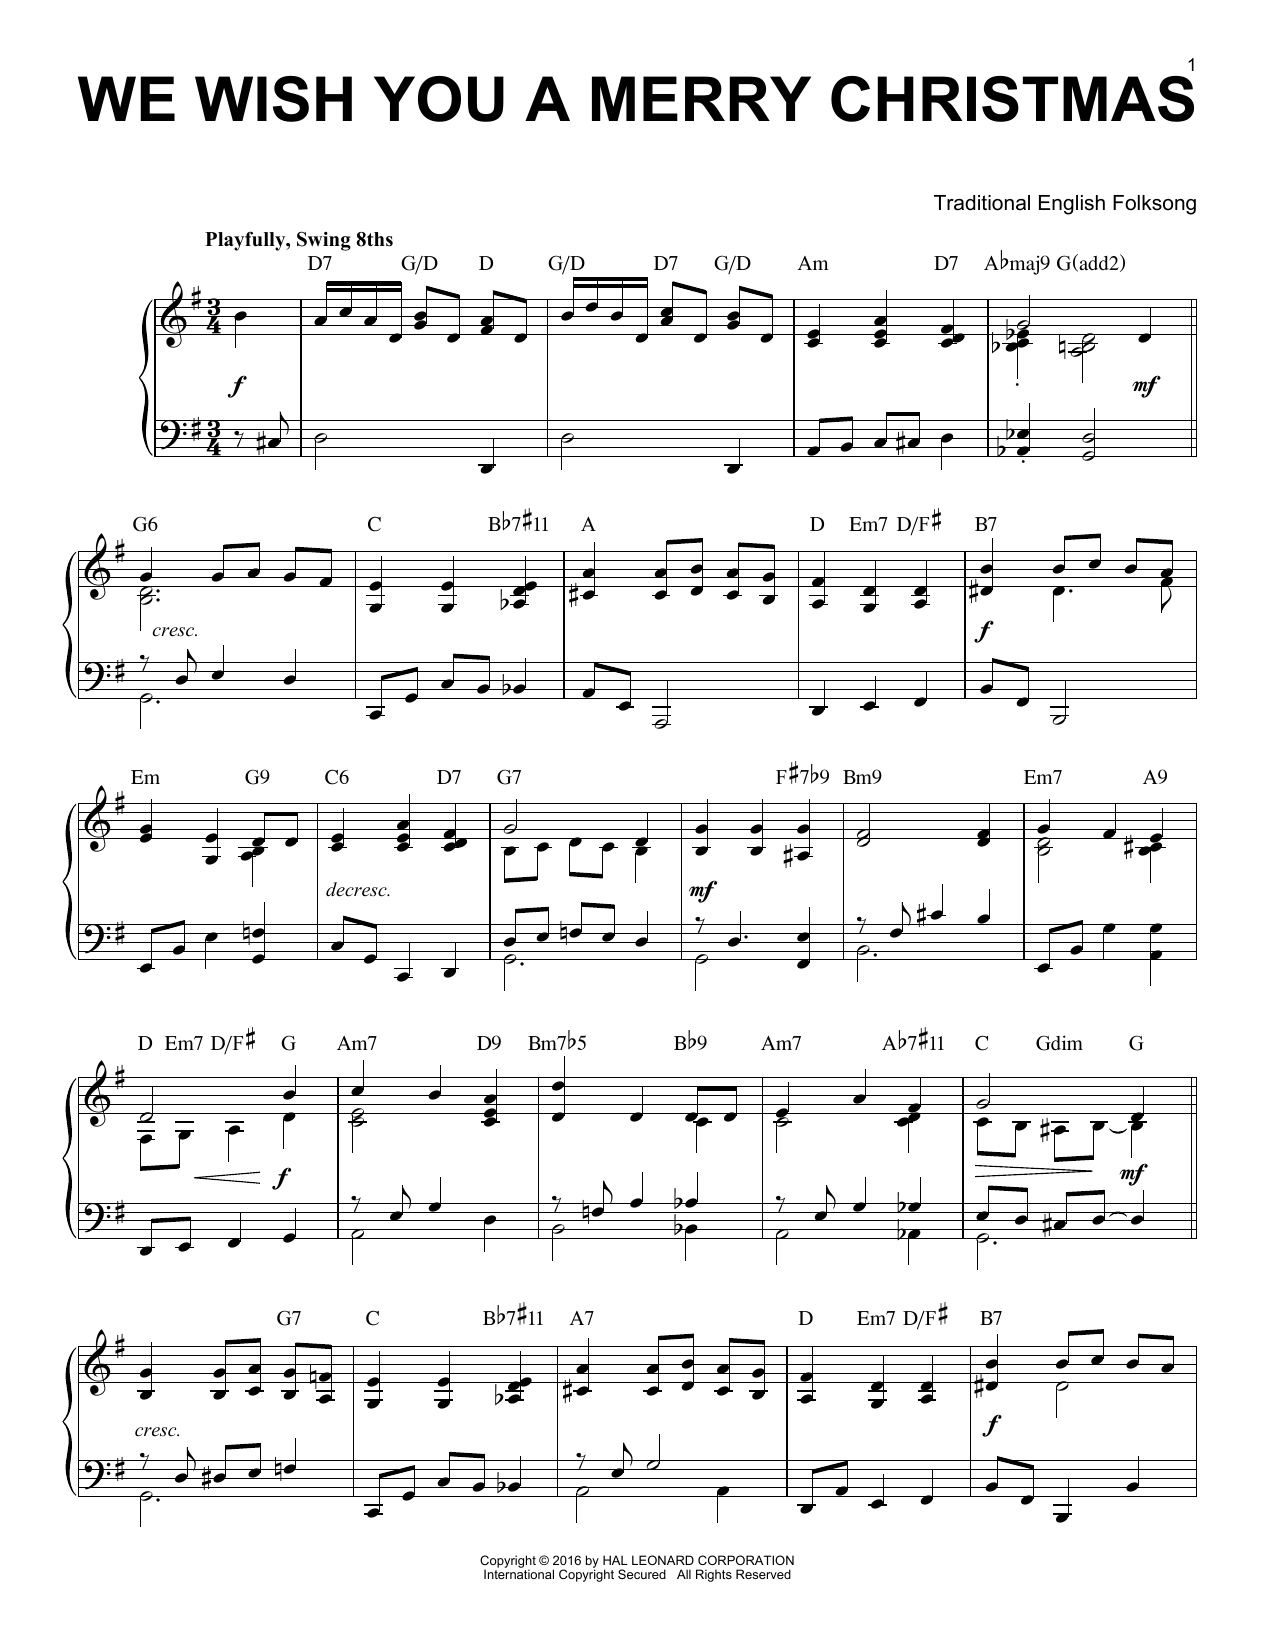 Download Traditional English Folksong We Wish You A Merry Christmas [Jazz ver Sheet Music